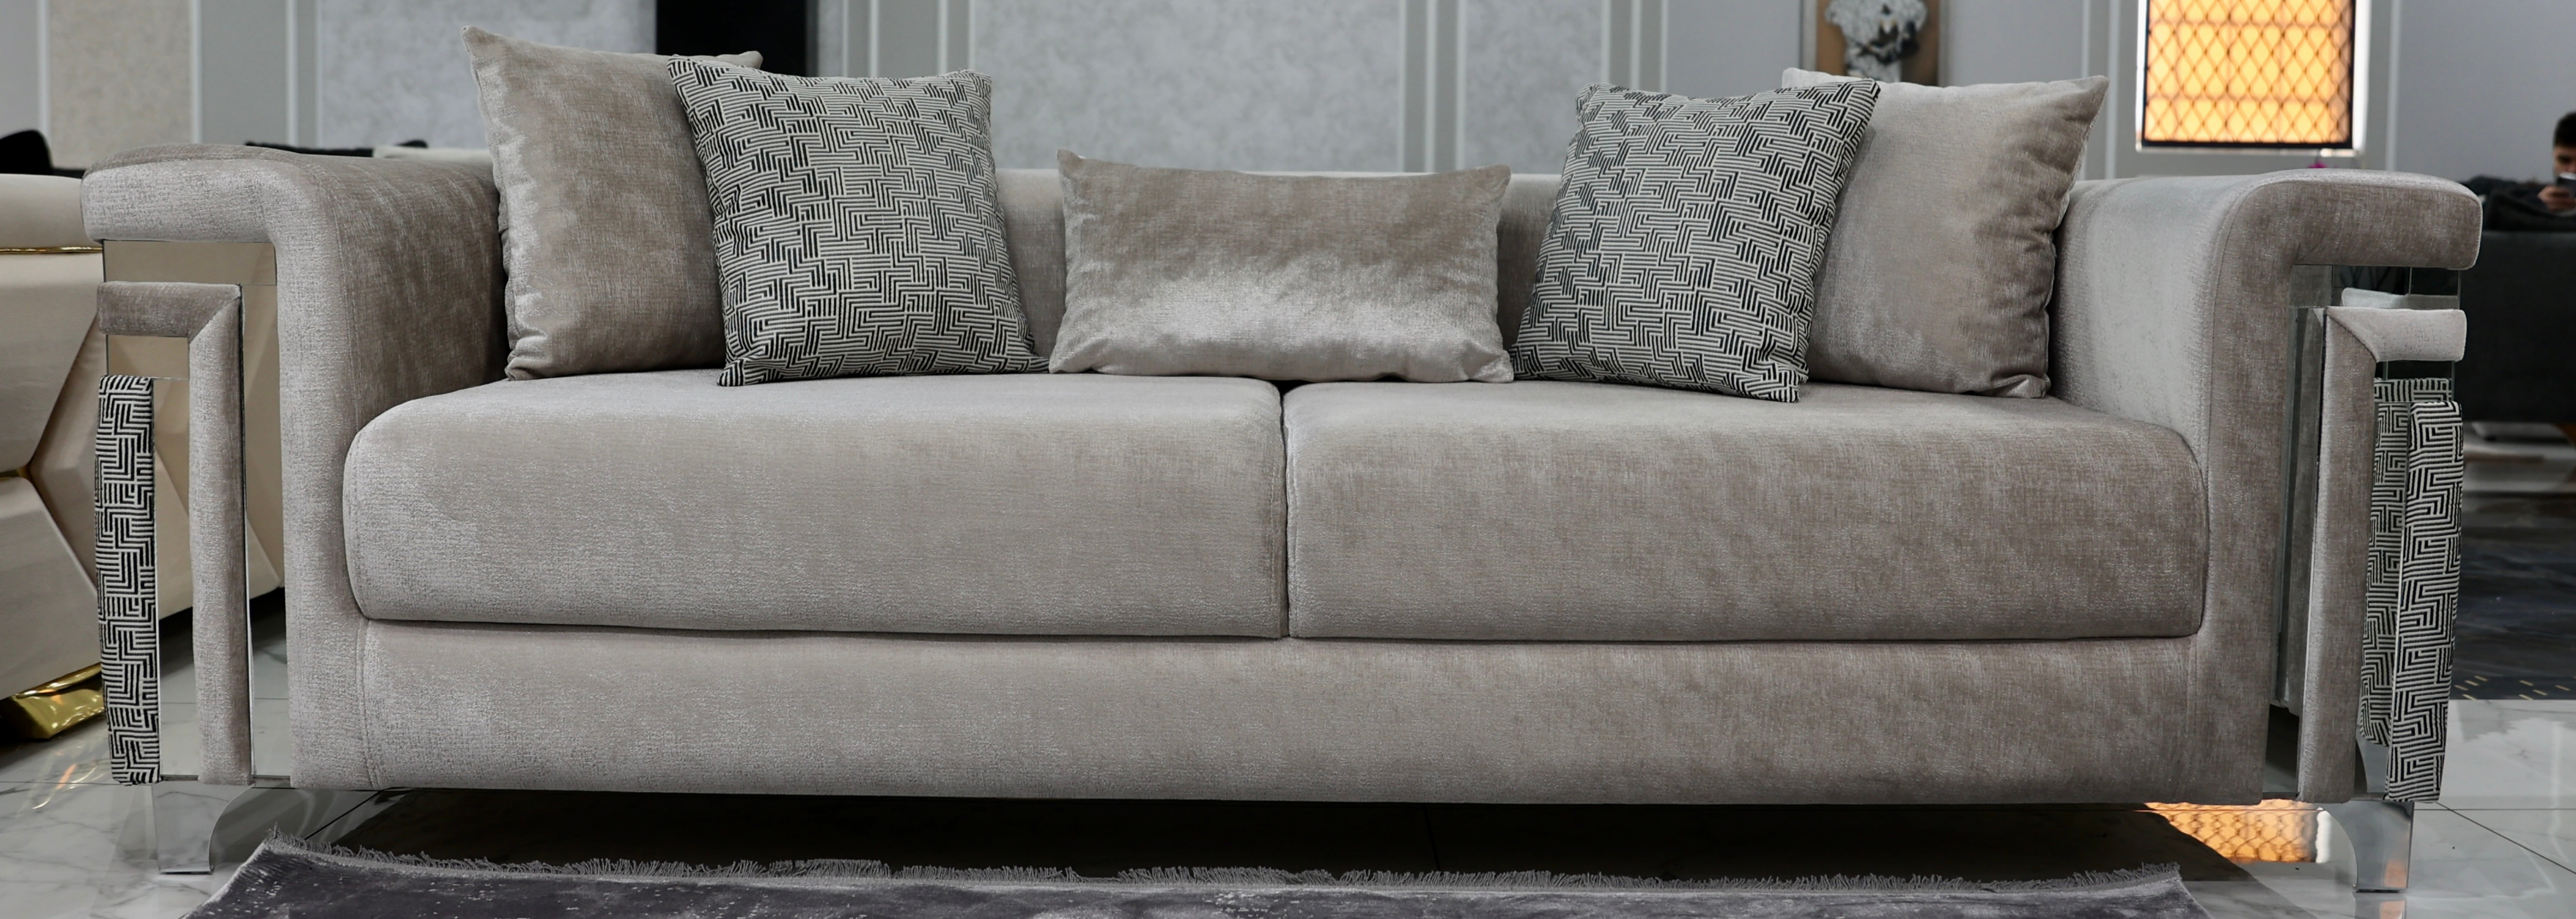 How to Choose the Right Modern Sofa for Your Living Room by Nilo Cortex